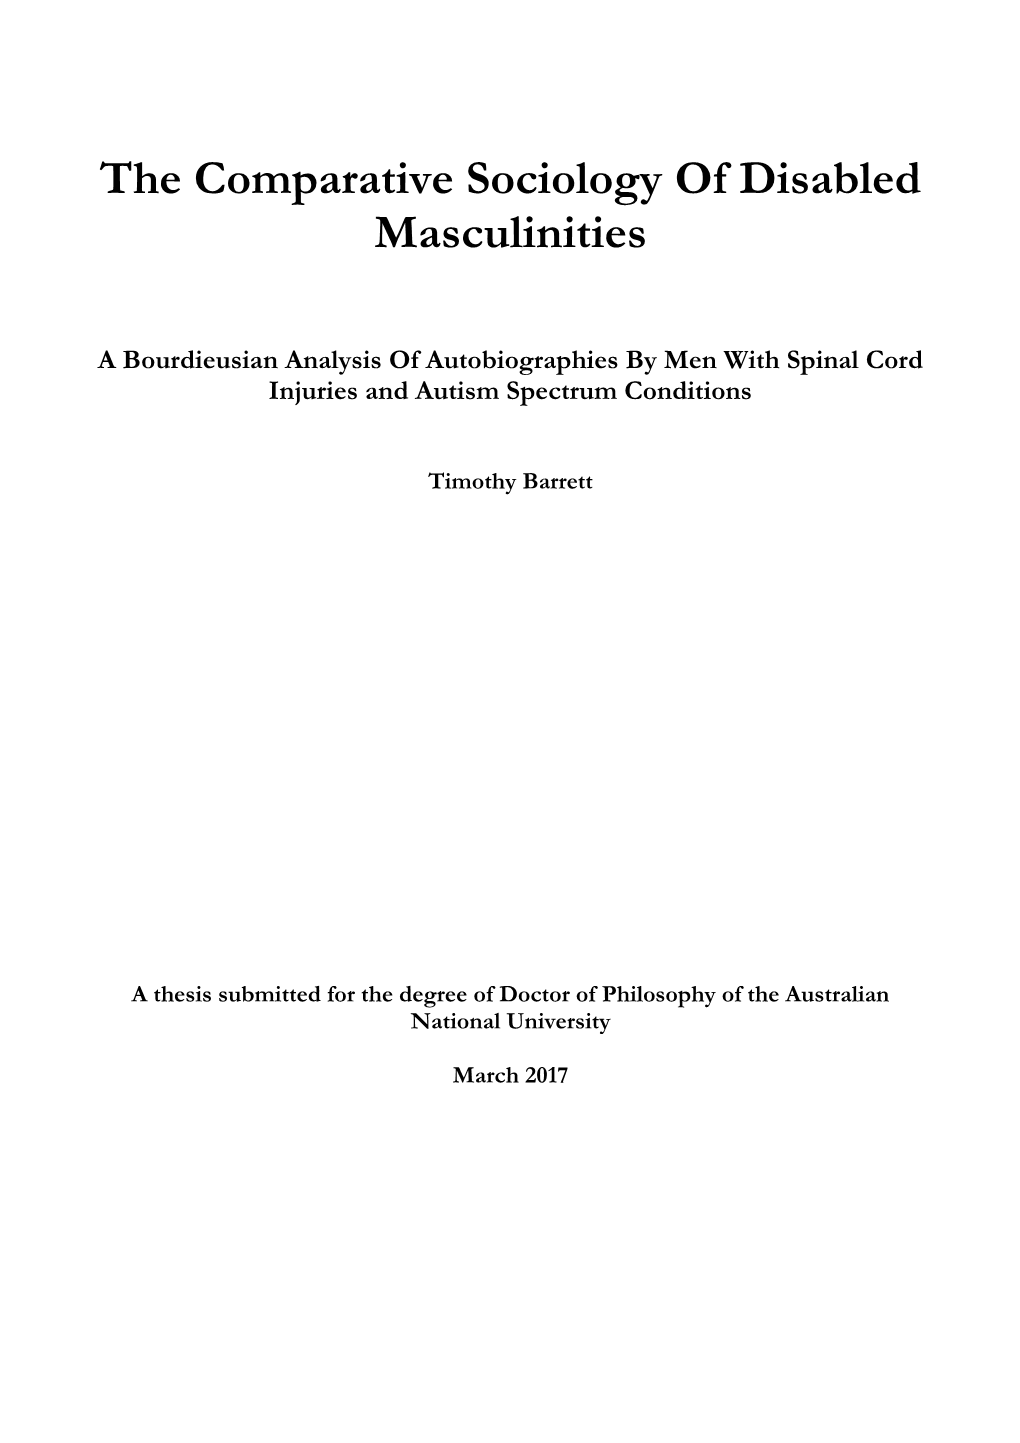 The Comparative Sociology of Disabled Masculinities